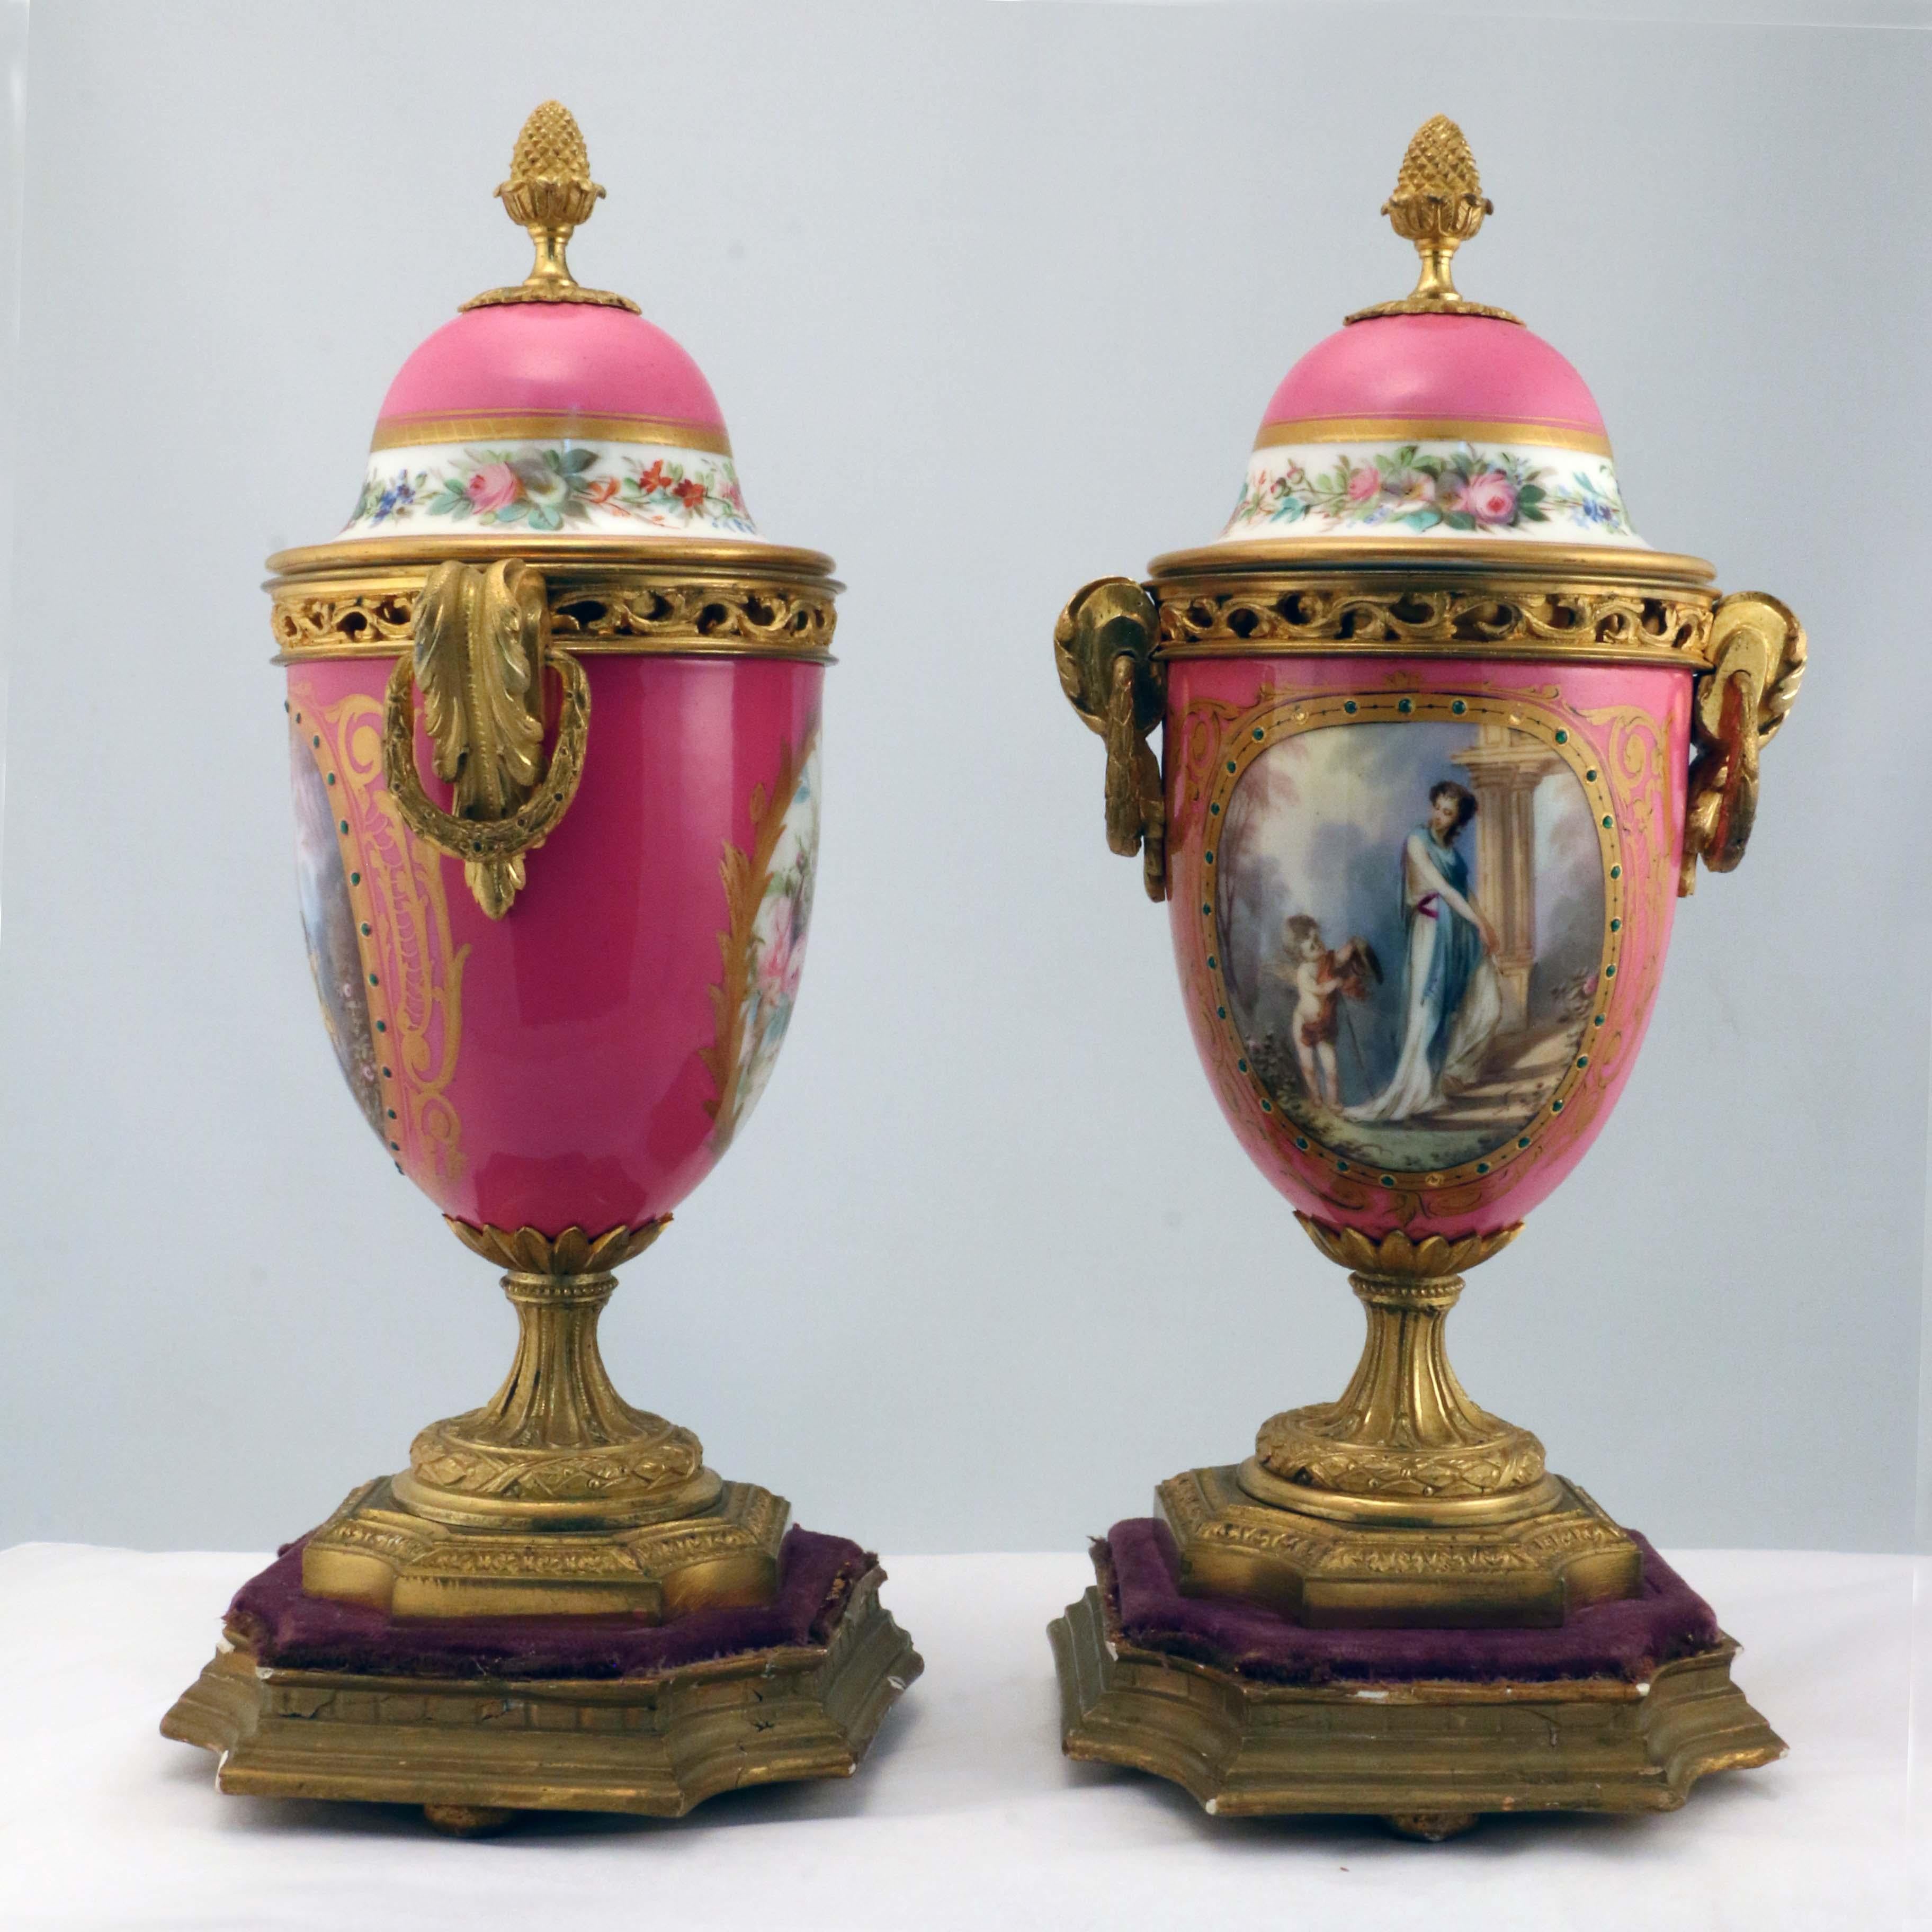 French Pair of Louis XV Style Gilt Bronze Mounted Paris Pink Porcelain Covered Urns For Sale